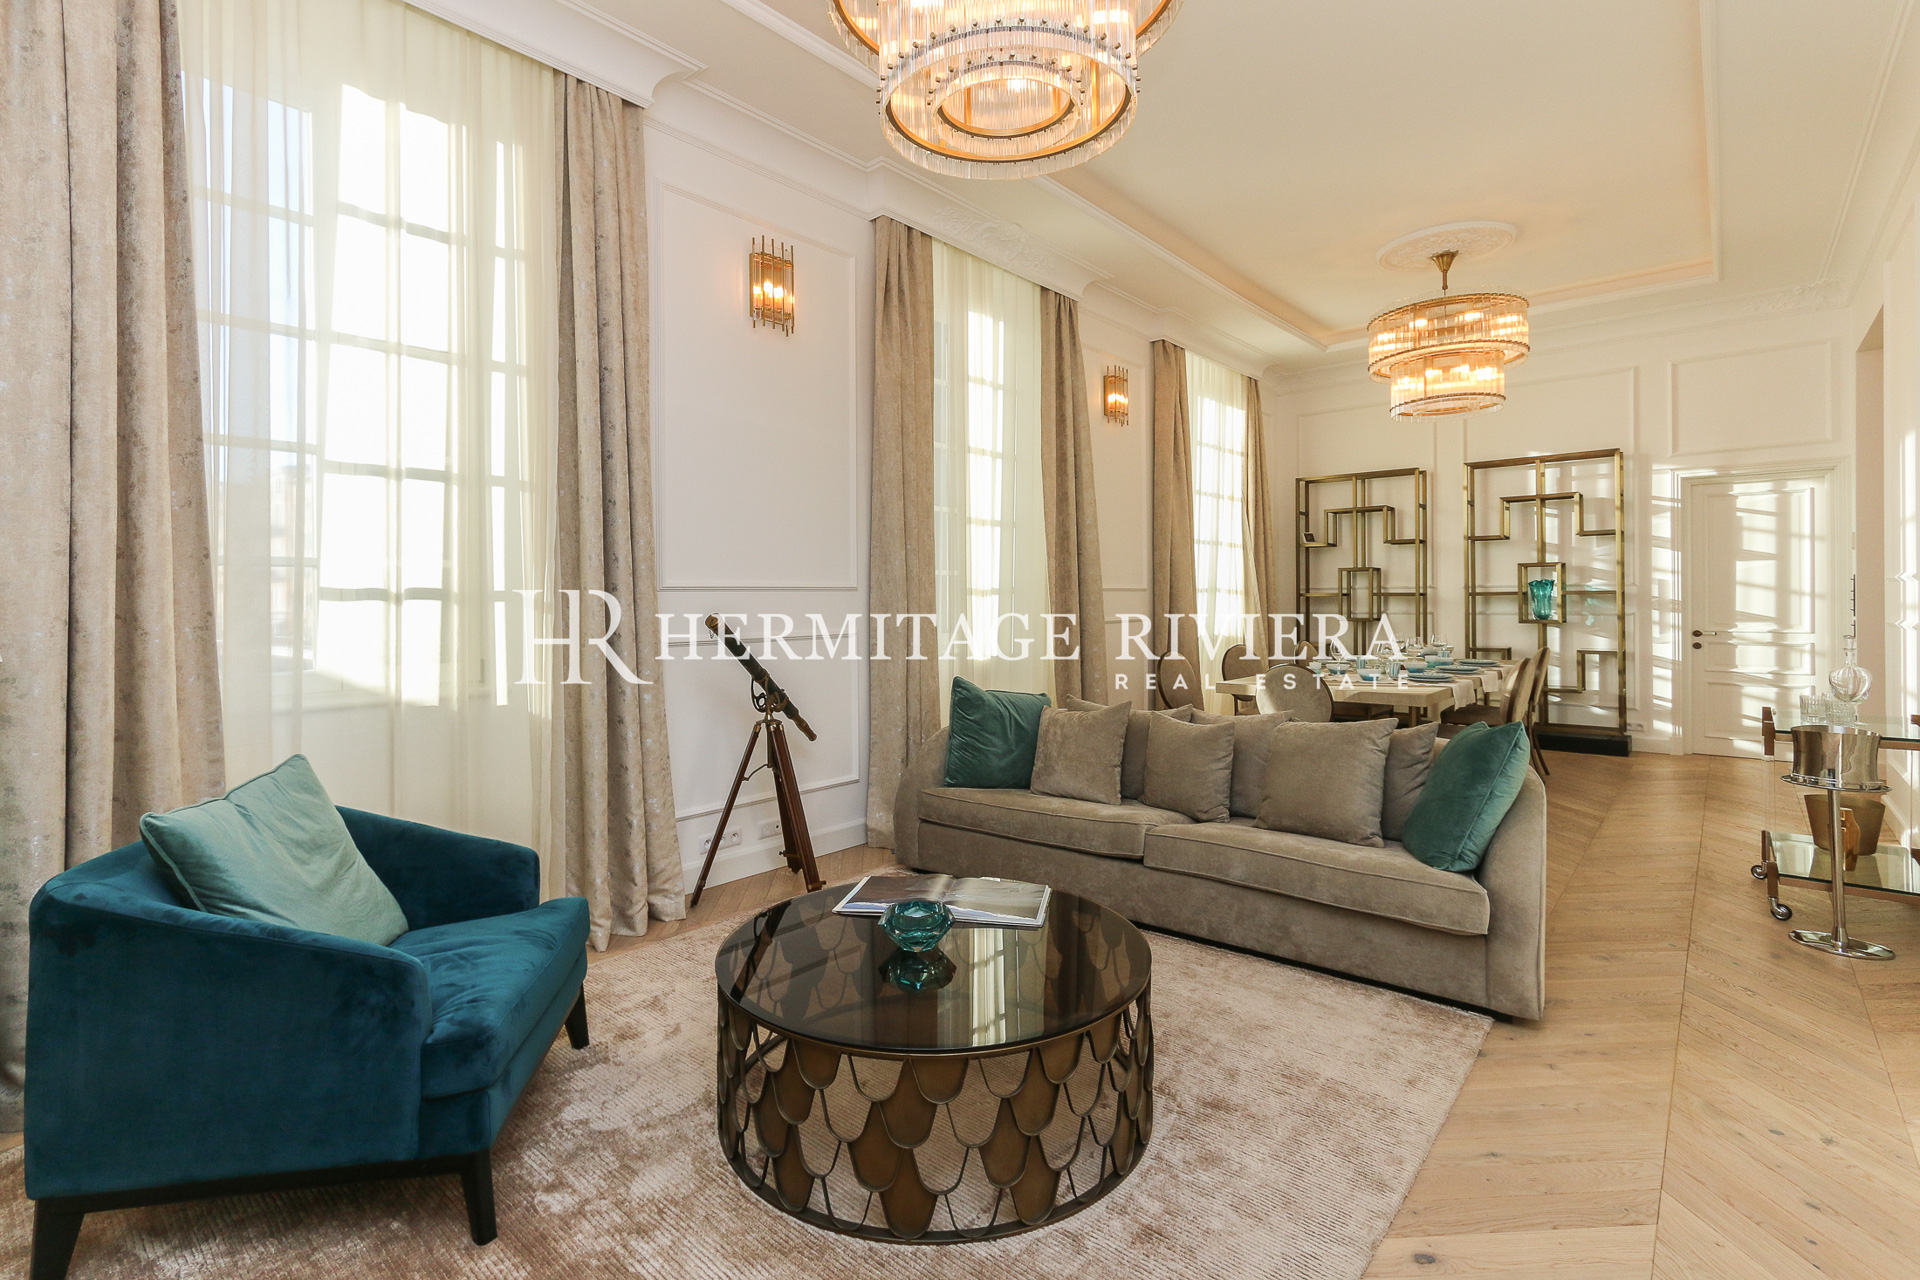 Sumptuous apartment in an exceptional location (image 3)